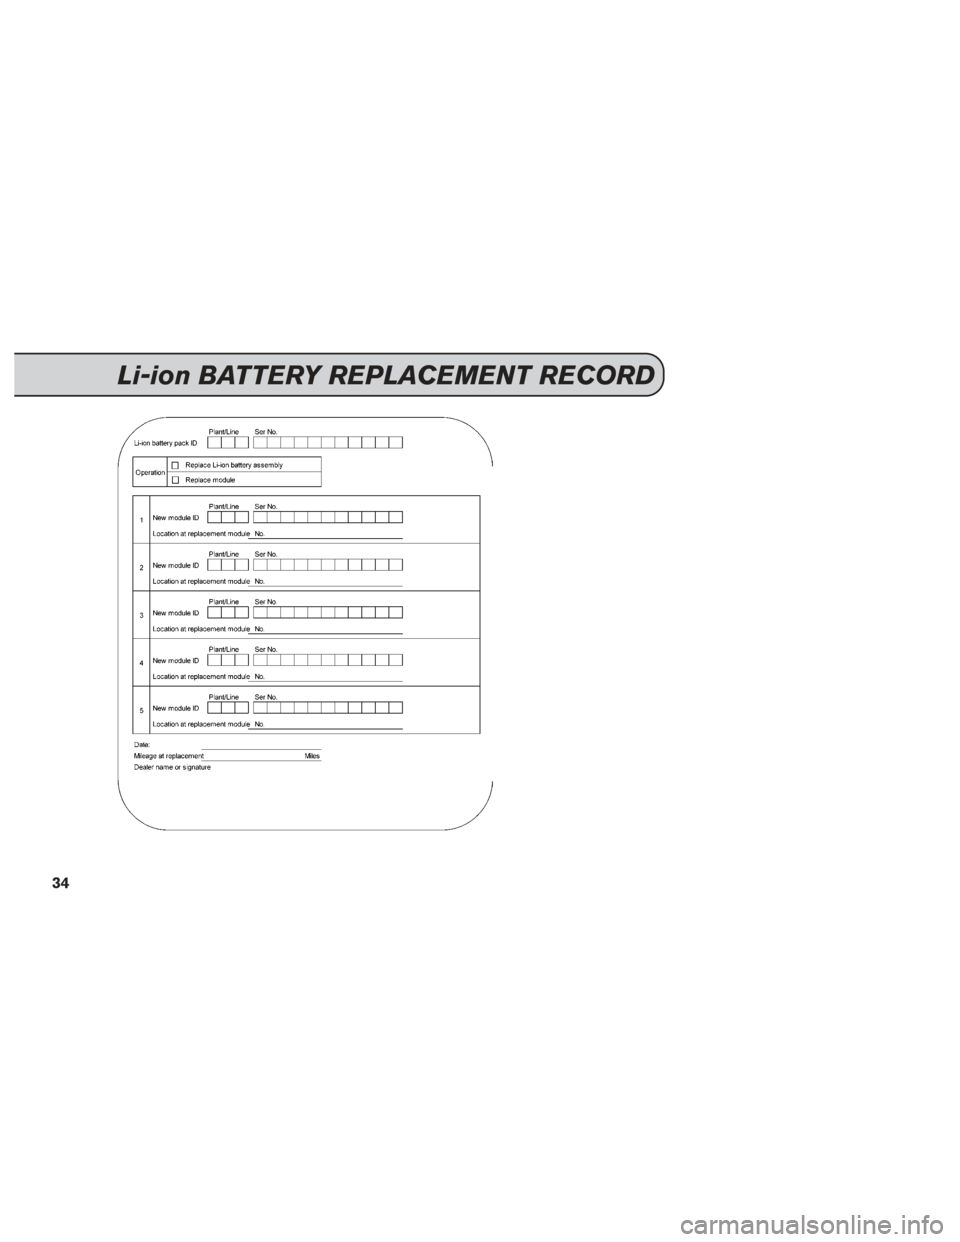 NISSAN LEAF 2015 1.G Service And Maintenance Guide Li-ion BATTERY REPLACEMENT RECORD
34 